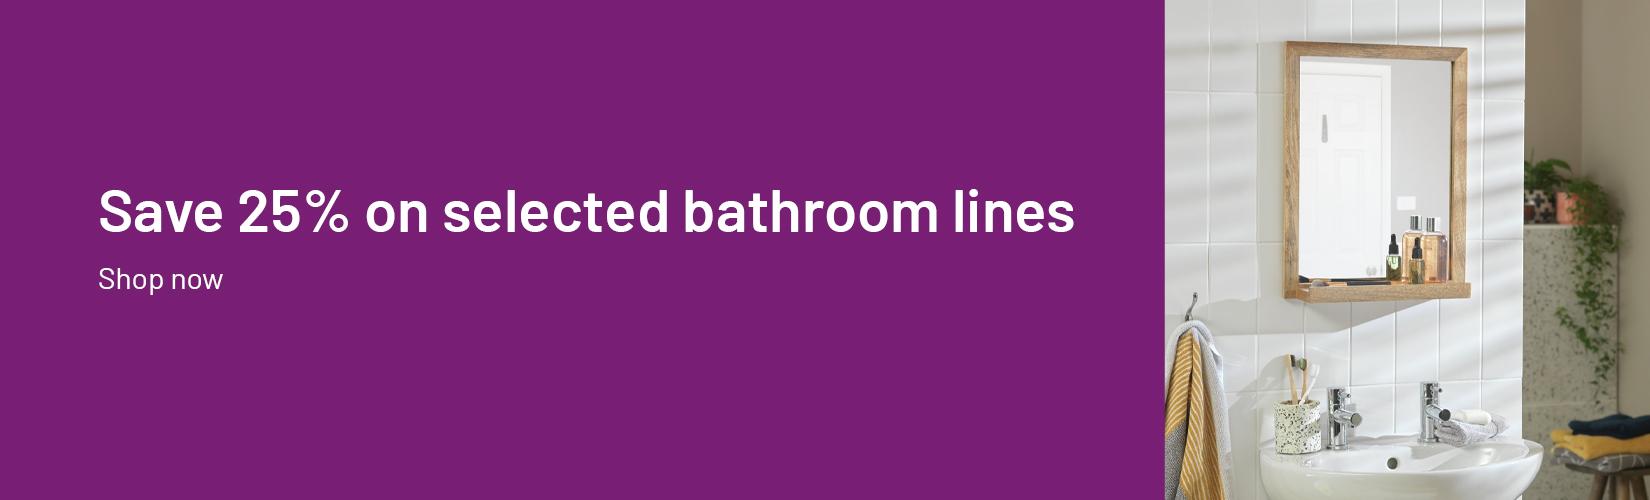 Save 25% on selected bathroom lines.